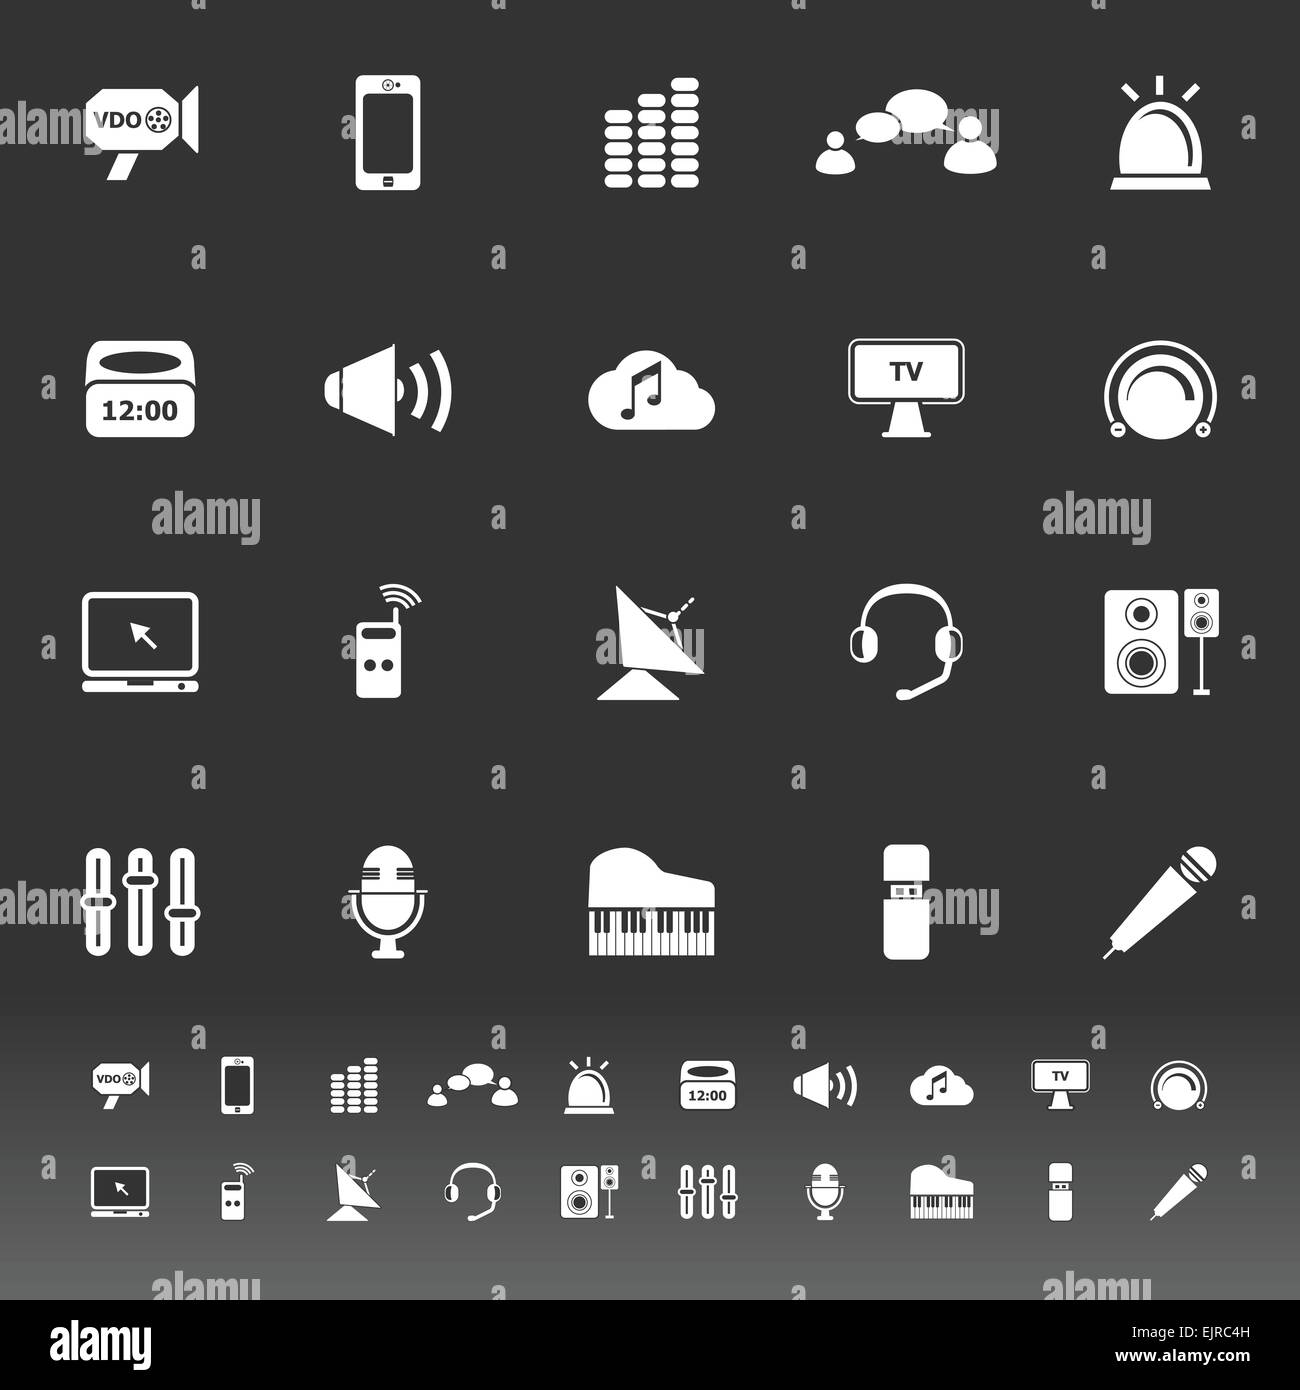 Sound icons on gray background, stock vector Stock Vector